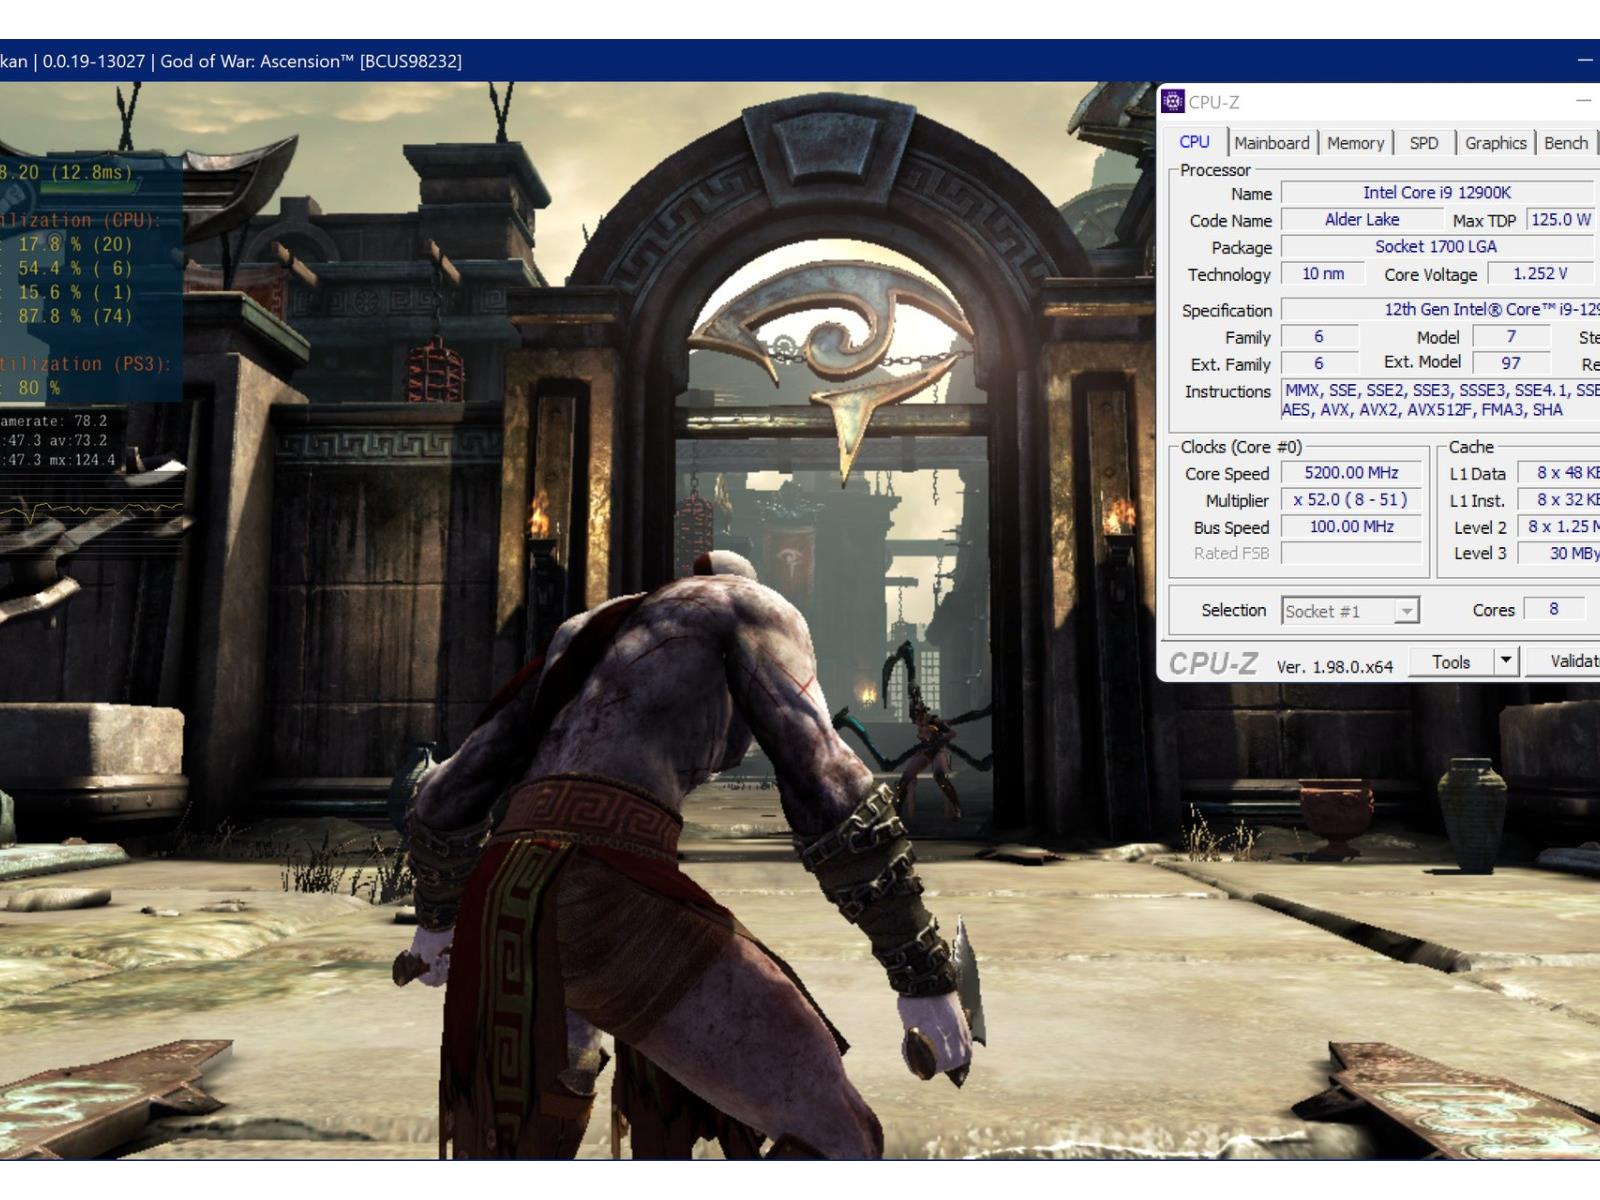 PlayStation 3 Emulator RCPS3 Latest Video Shows Progress For The